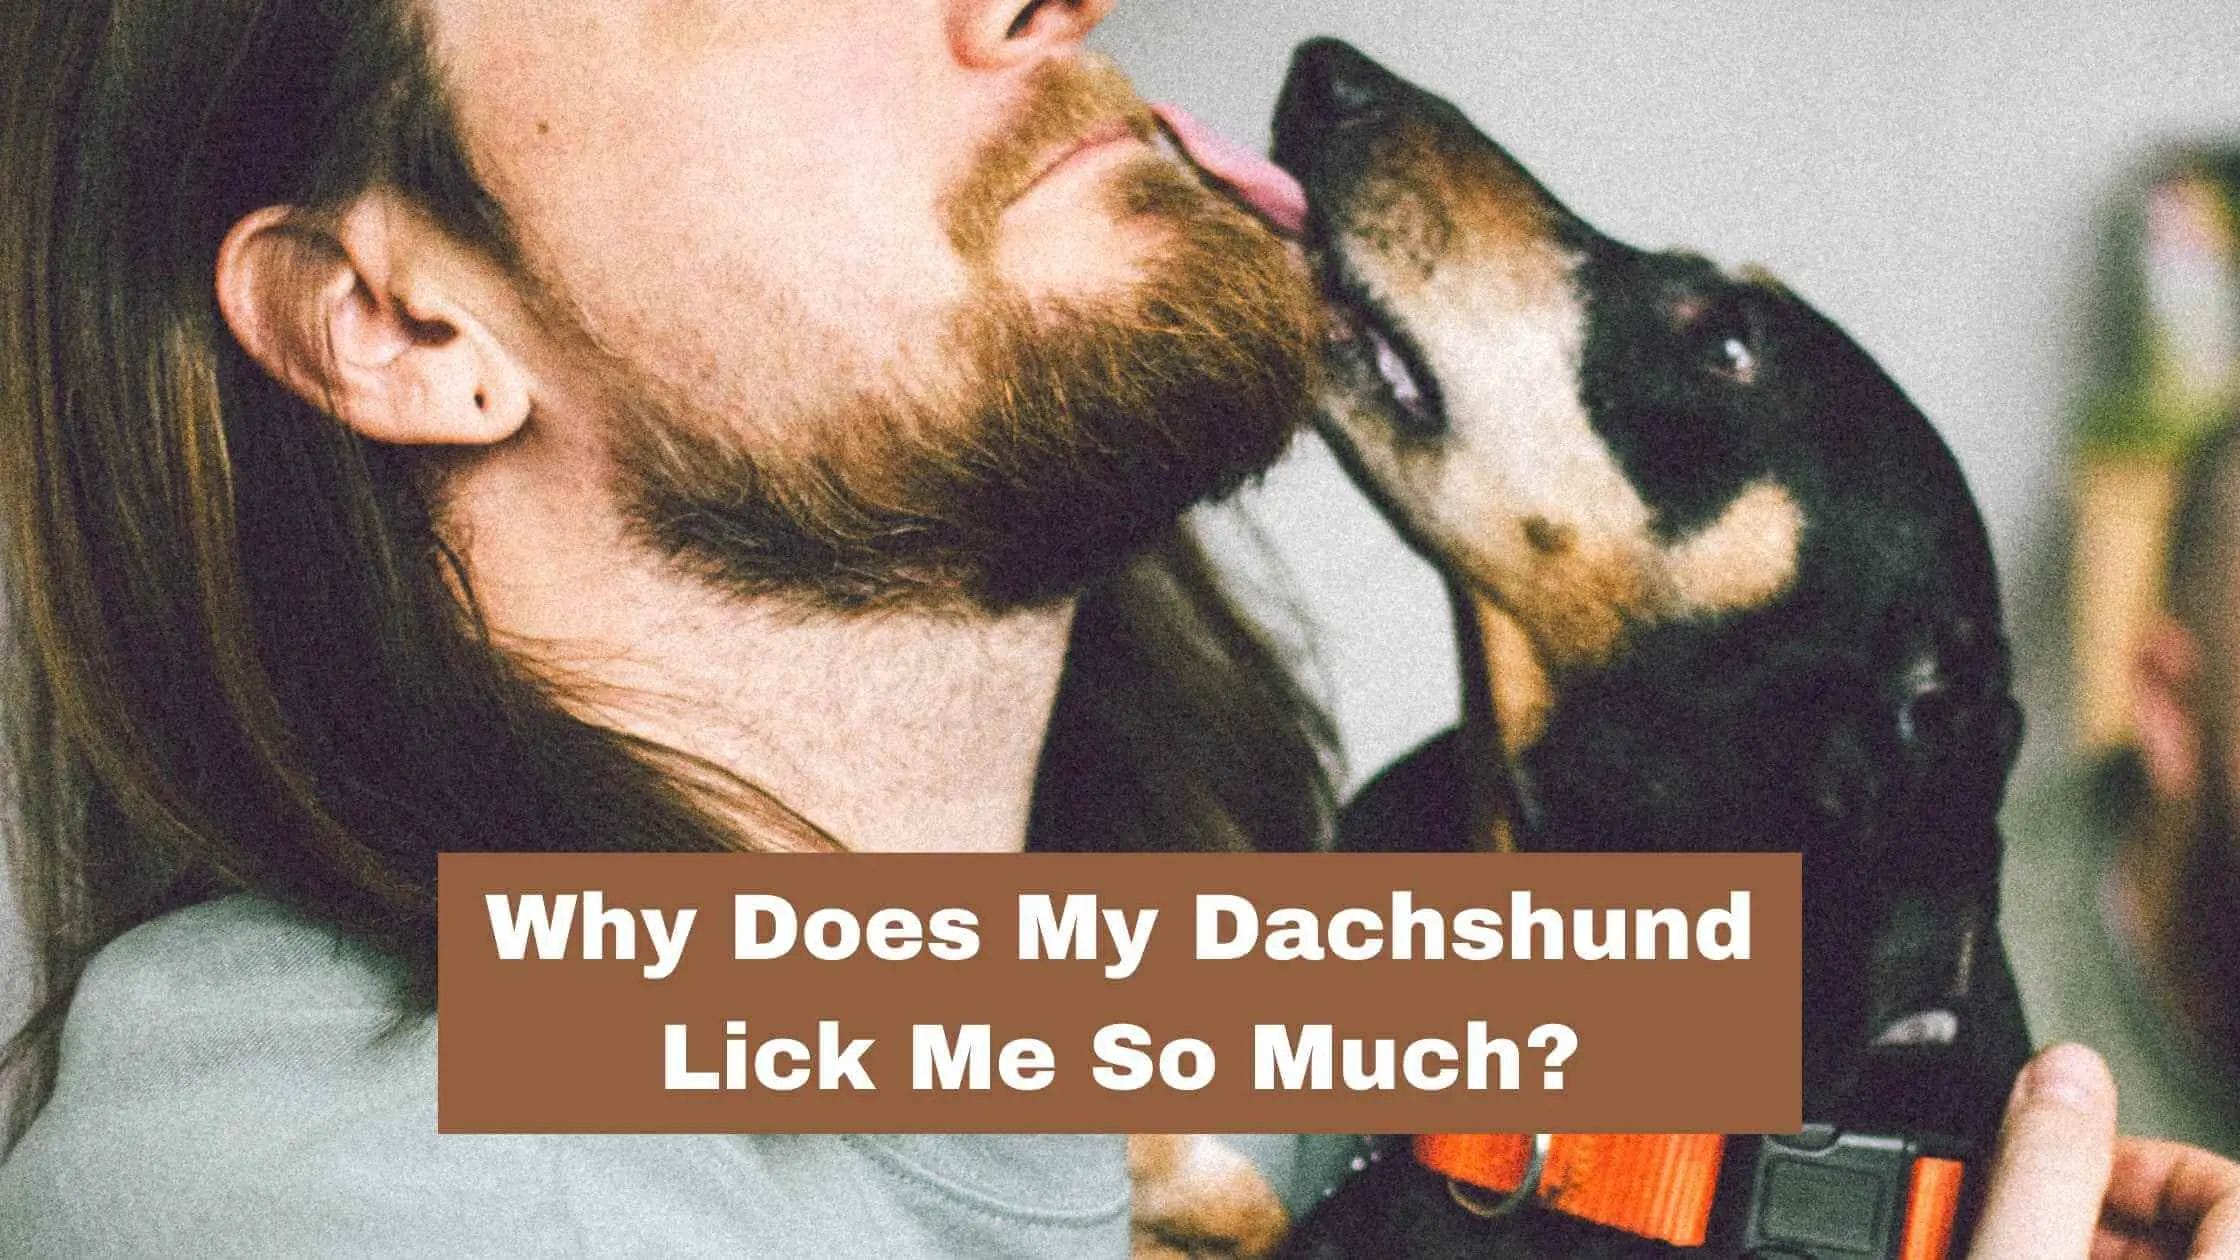 Why Does My Dachshund Lick Me So Much